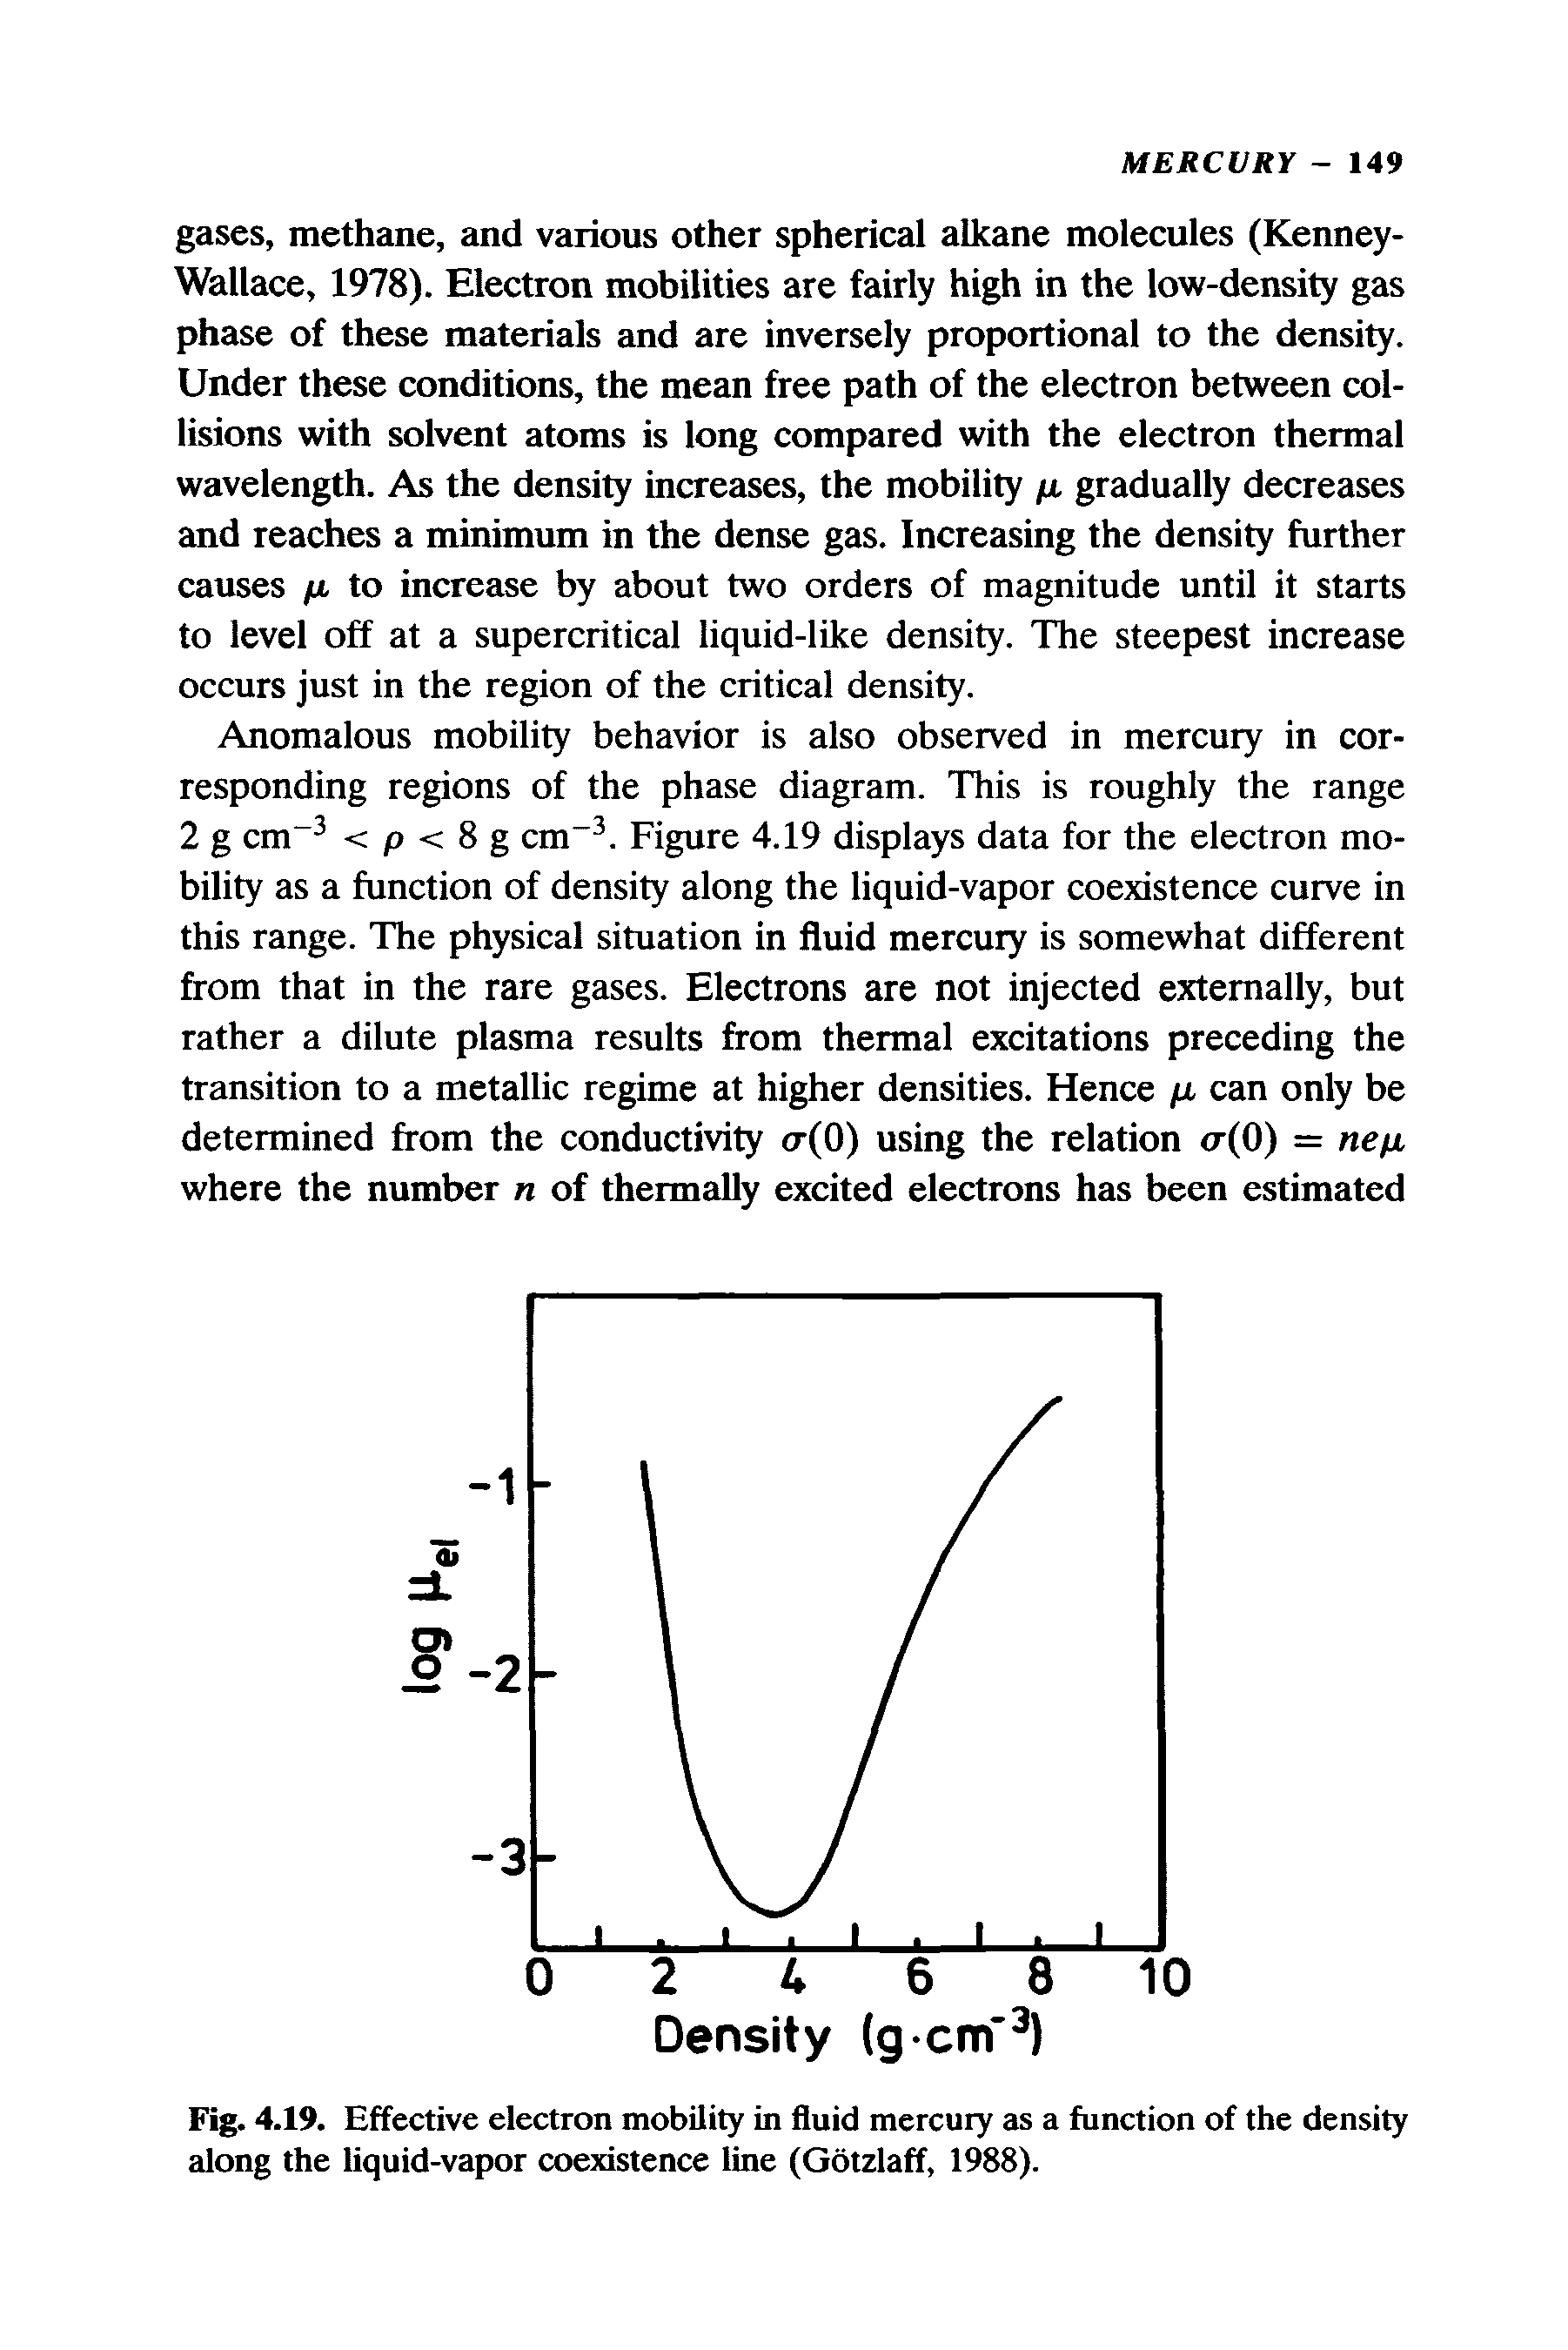 Fig. 4.19. Effective electron mobility in fluid mercury as a function of the density along the liquid-vapor coexistence line (Gotzlaff, 1988).